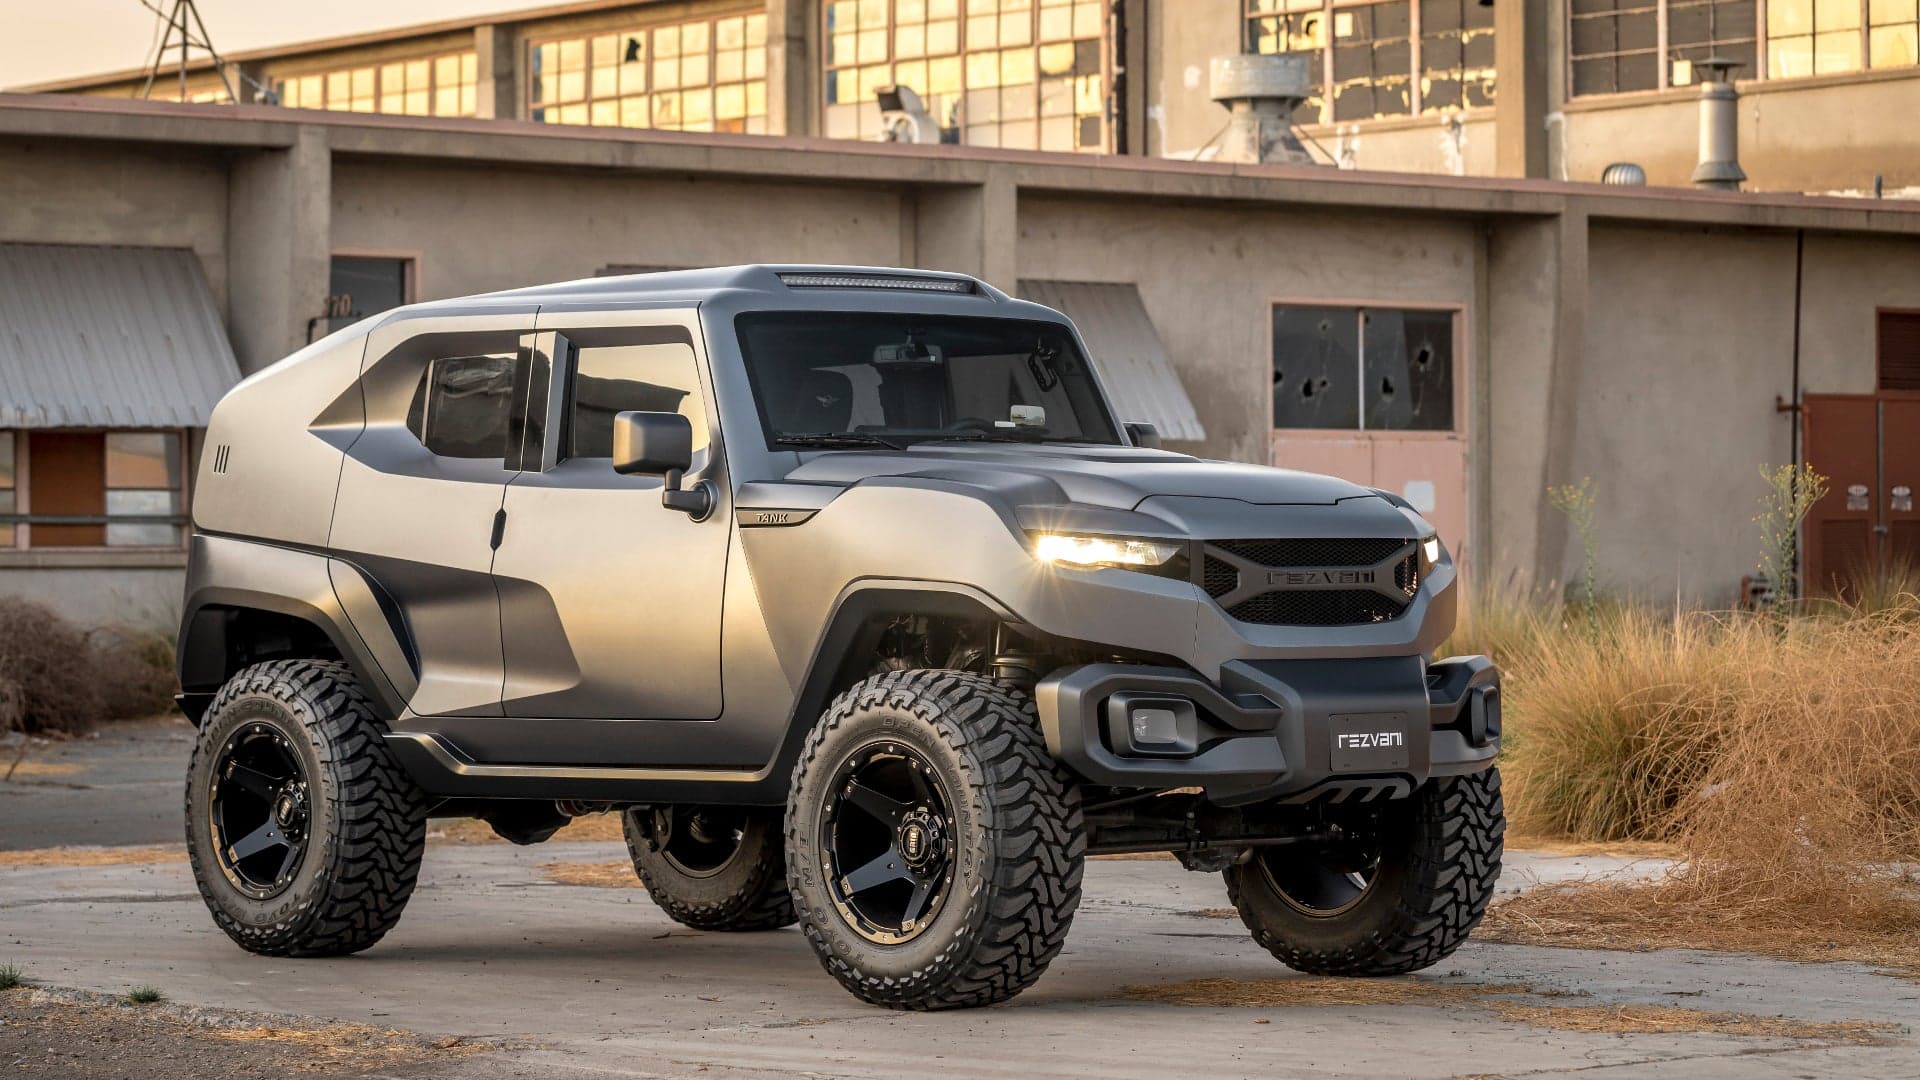 The Rezvani Tank Would Get You Through The Zombie Apocalypse Just Fine